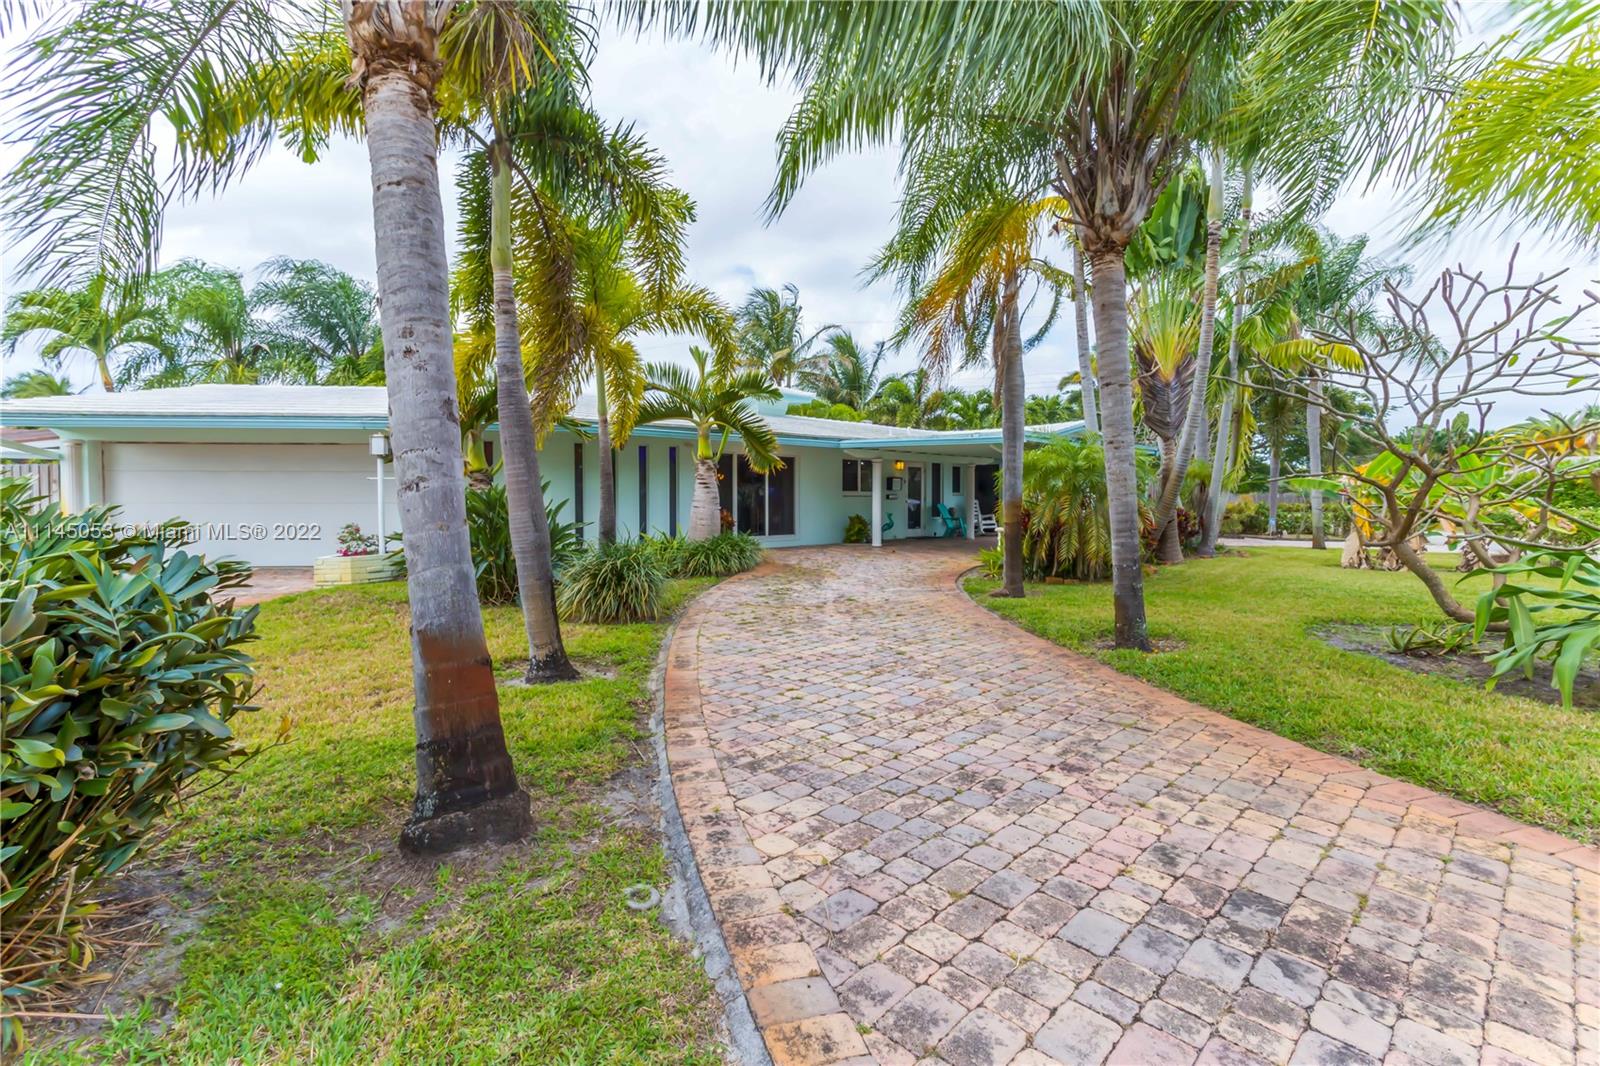 HUGE FOUR BEDROOM, THREE BATH HOME WITH A POOL IN WILTON MANORS! THIS HOME SITS ON AN OVERSIZED CORNER LOT, WITH AN EXTRA LARGE DRIVEWAY! GOURMET KITCHEN WAS RECENTLY UPGRADED WITH QUARTZ COUNTERTOPS, NEW CABINETRY, DECORATIVE BACKSPLASH AND STAINLESS STEEL APPLIANCES. SPACIOUS LIVING AREAS WITH VIEWS OF STUNNING POOL AREA. THE BACKYARD IS THE PERFECT PLACE TO ENTERTAIN FEATURING A SALT WATER POOL, JACUZZI & SCREEN ENCLOSED PATIO. A/C & WATER HEATER HAVE BEEN REPLACED. ALL 3 BATHROOMS HAVE BEEN UPDATED (2016, 2013, 2008). HOME IS PROTECTED BY HURRICANE IMPACT WINDOWS/DOORS. PER SELLER HOUSE IS LARGER THAN TAX ROLL.